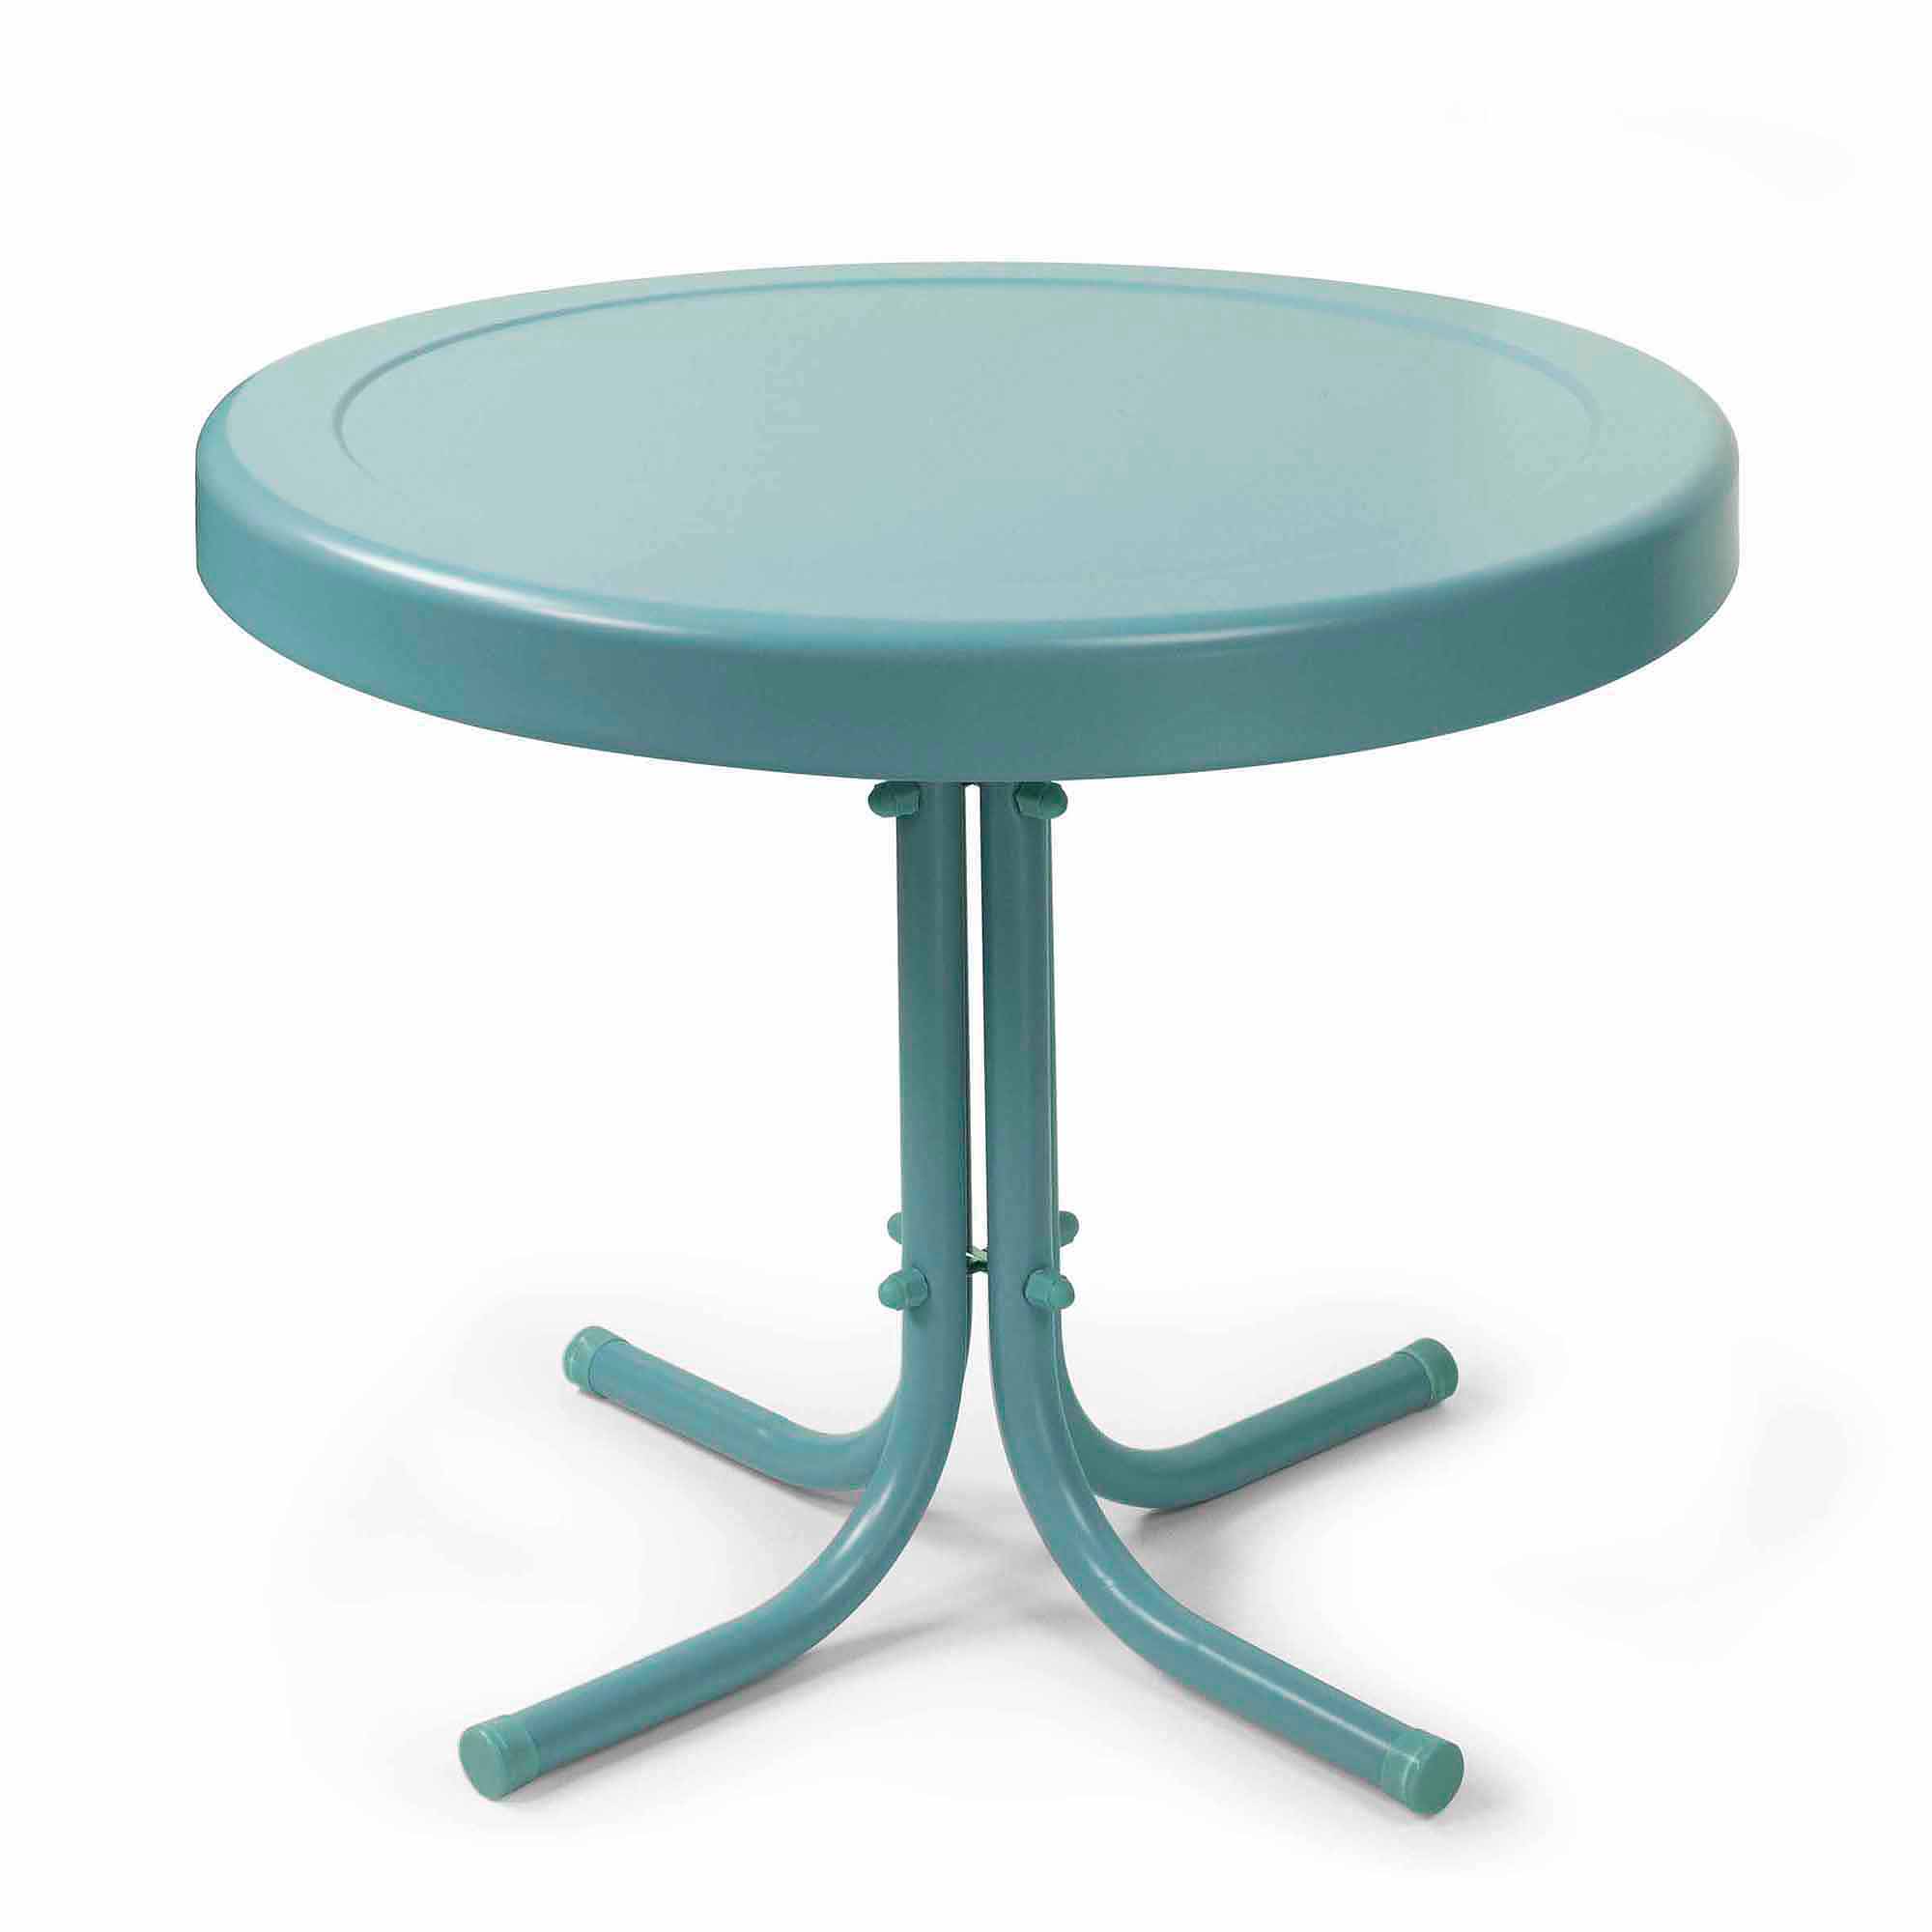 small sofa side table the super awesome teal end crosley furniture retro metal acrylic entry outdoor dog house ideas magazine marble coffee set target tables gold inch legs pipe